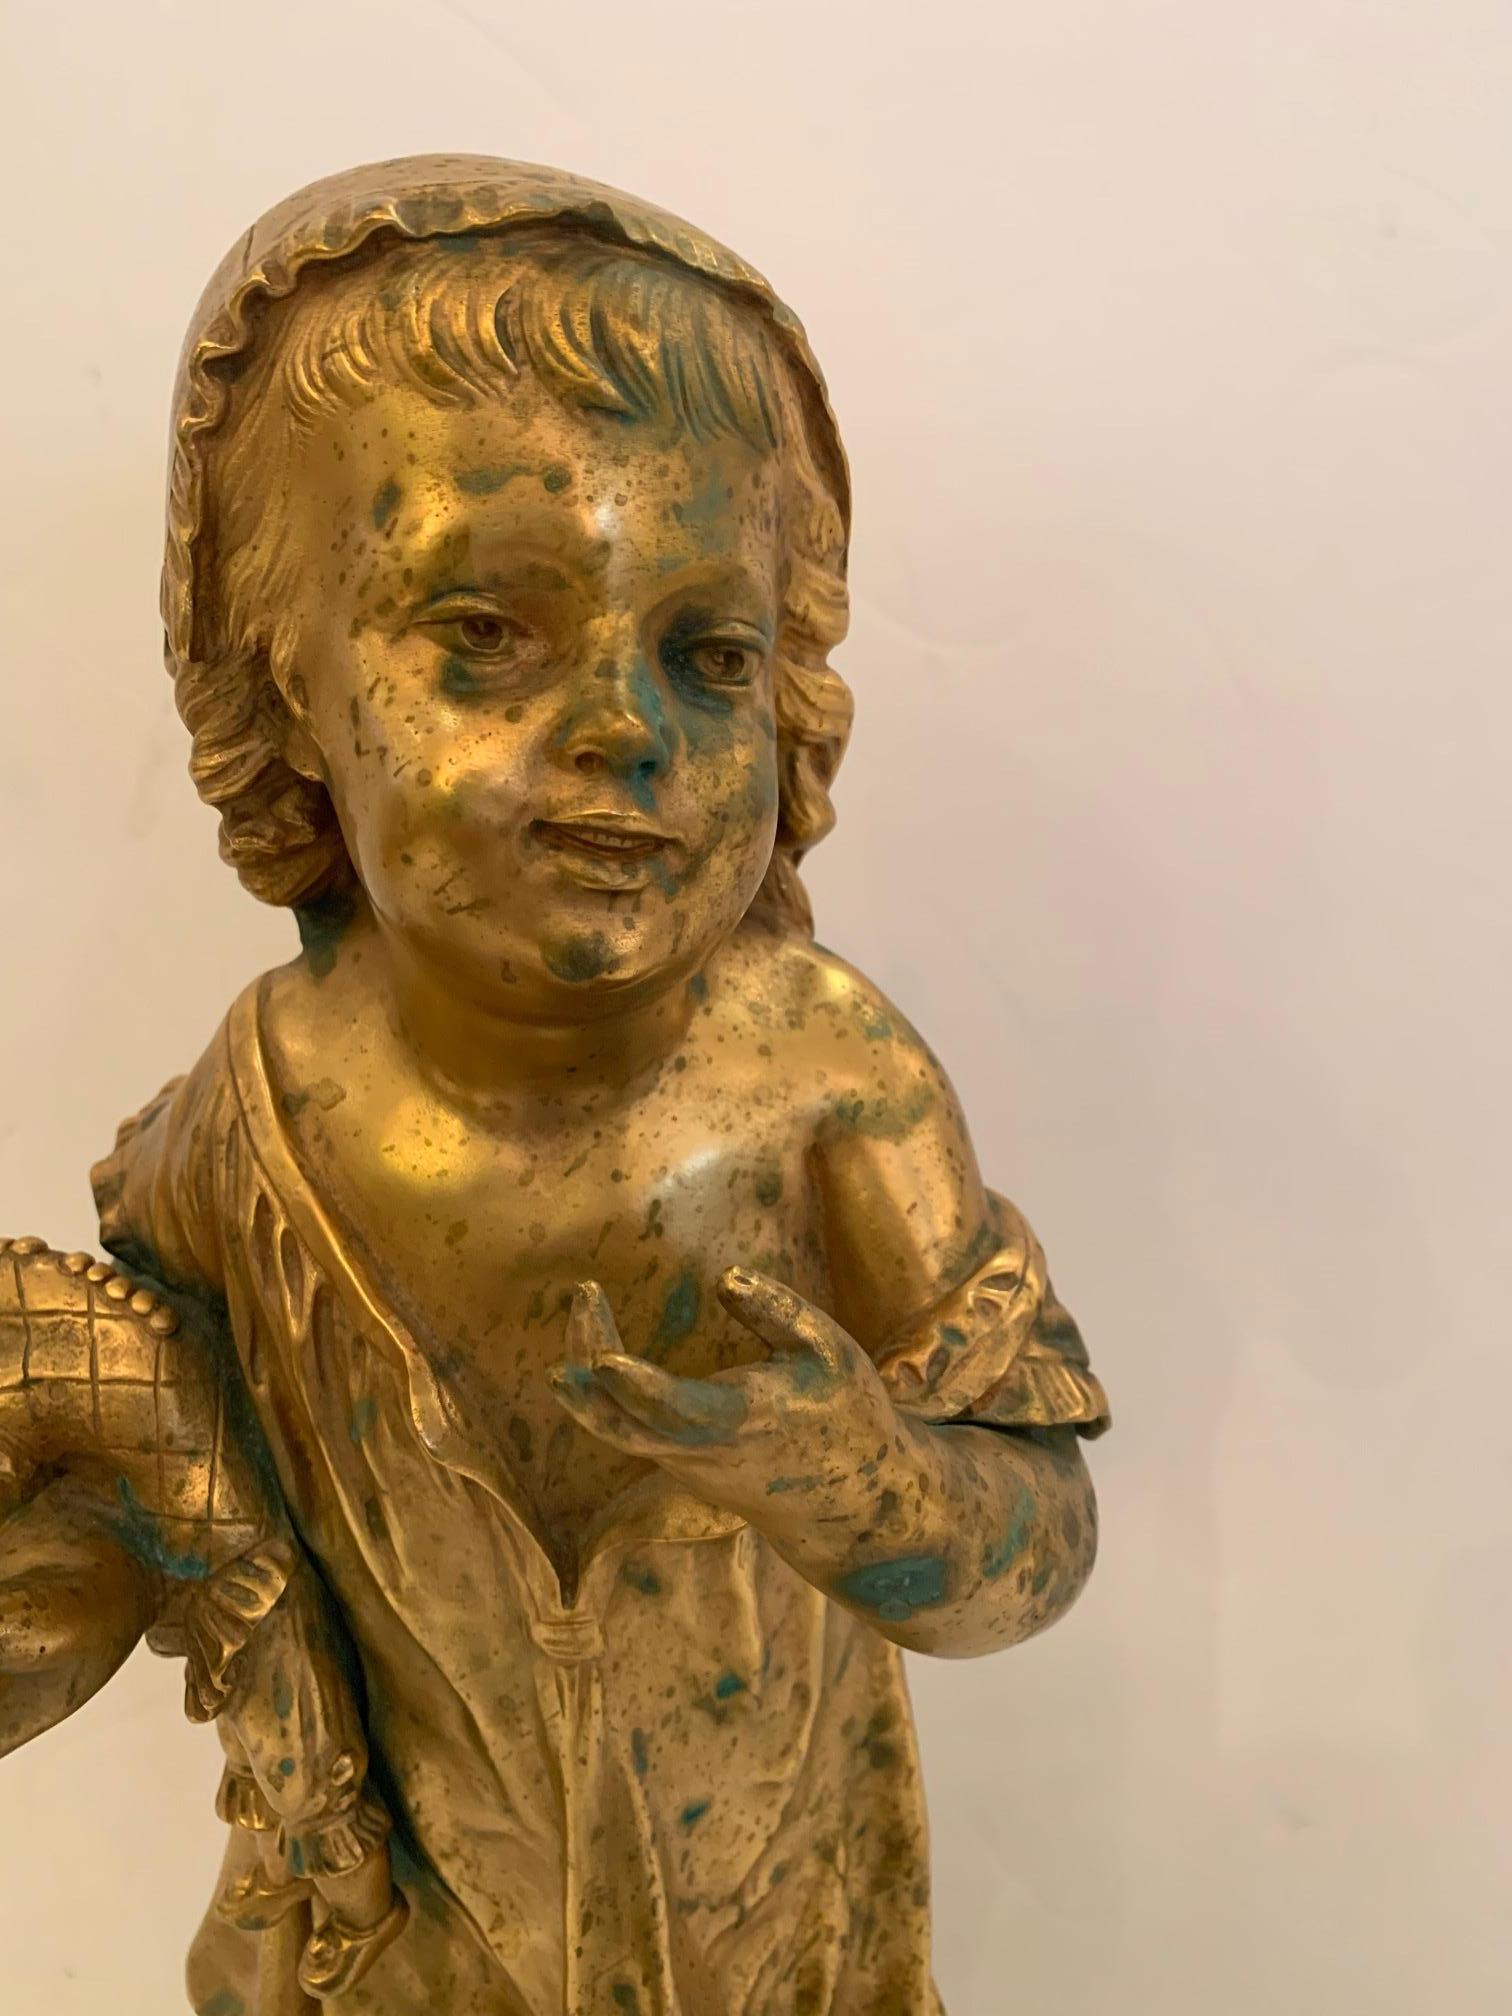 A gorgeous antique bronze figure of a young girl holding a clown doll and candle, signed Masse, (1855-1913) on the base and engraved 